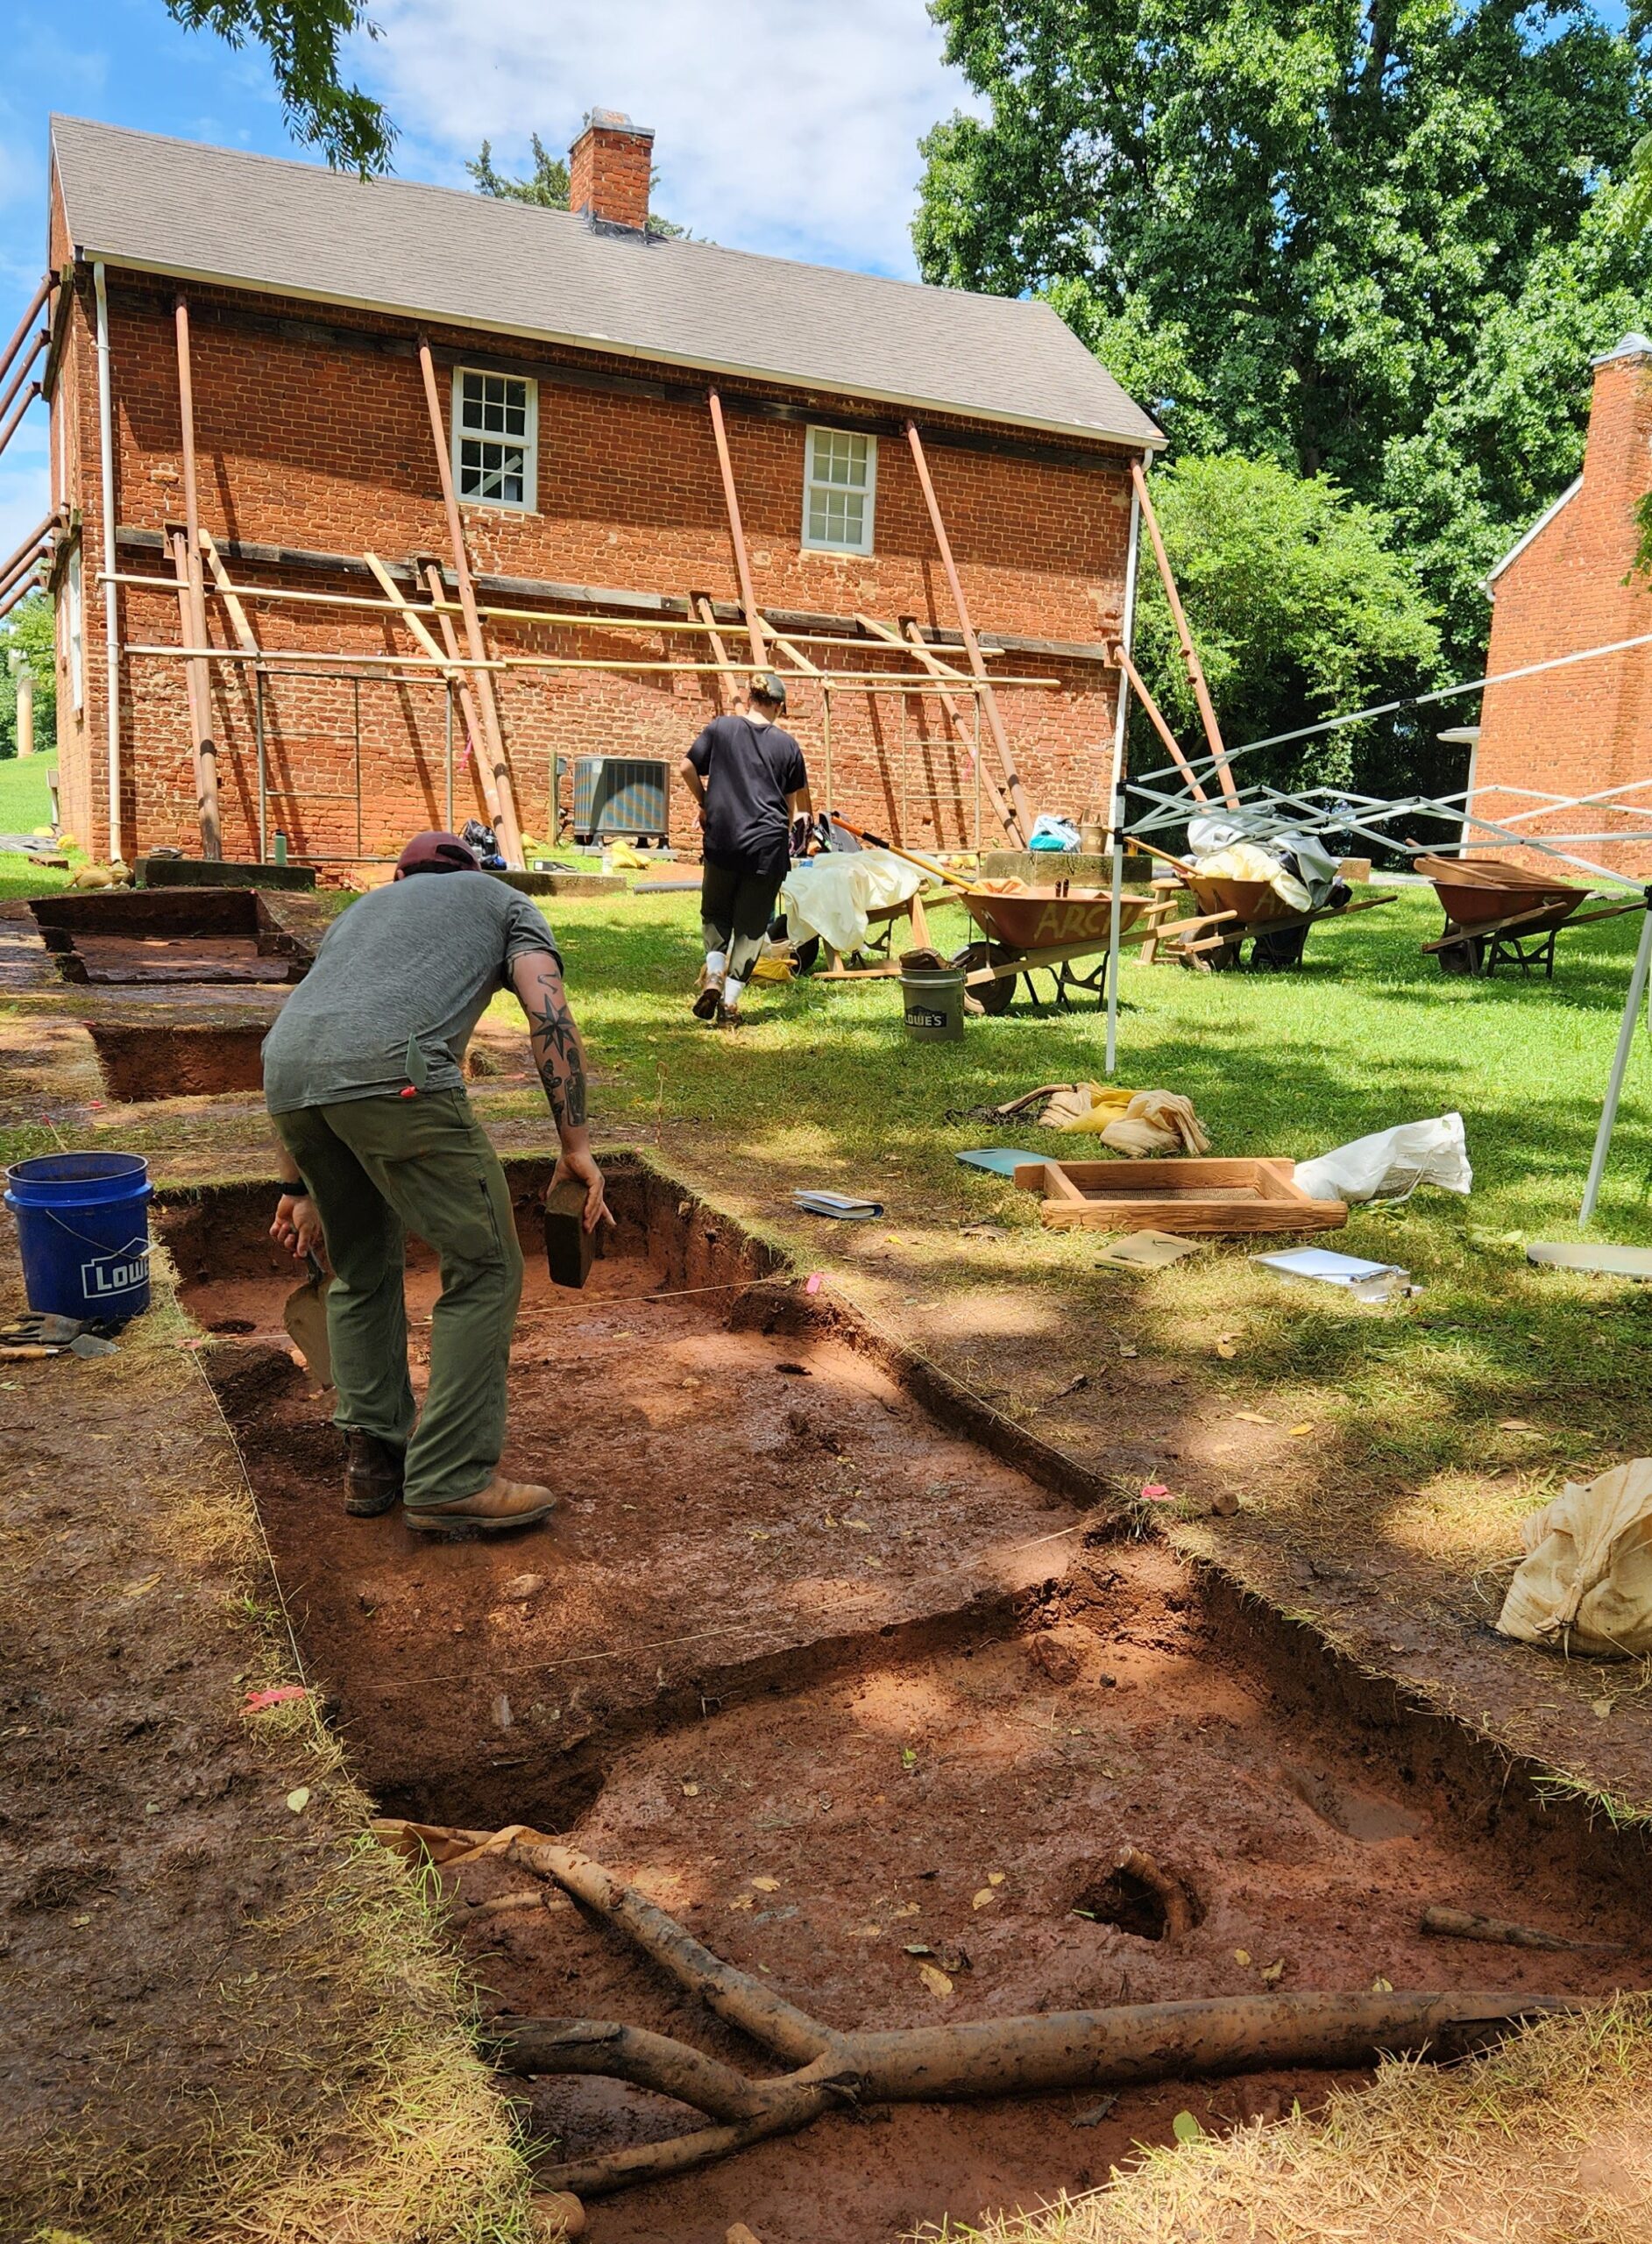 Archaeologists excavating unites behind a brick building.